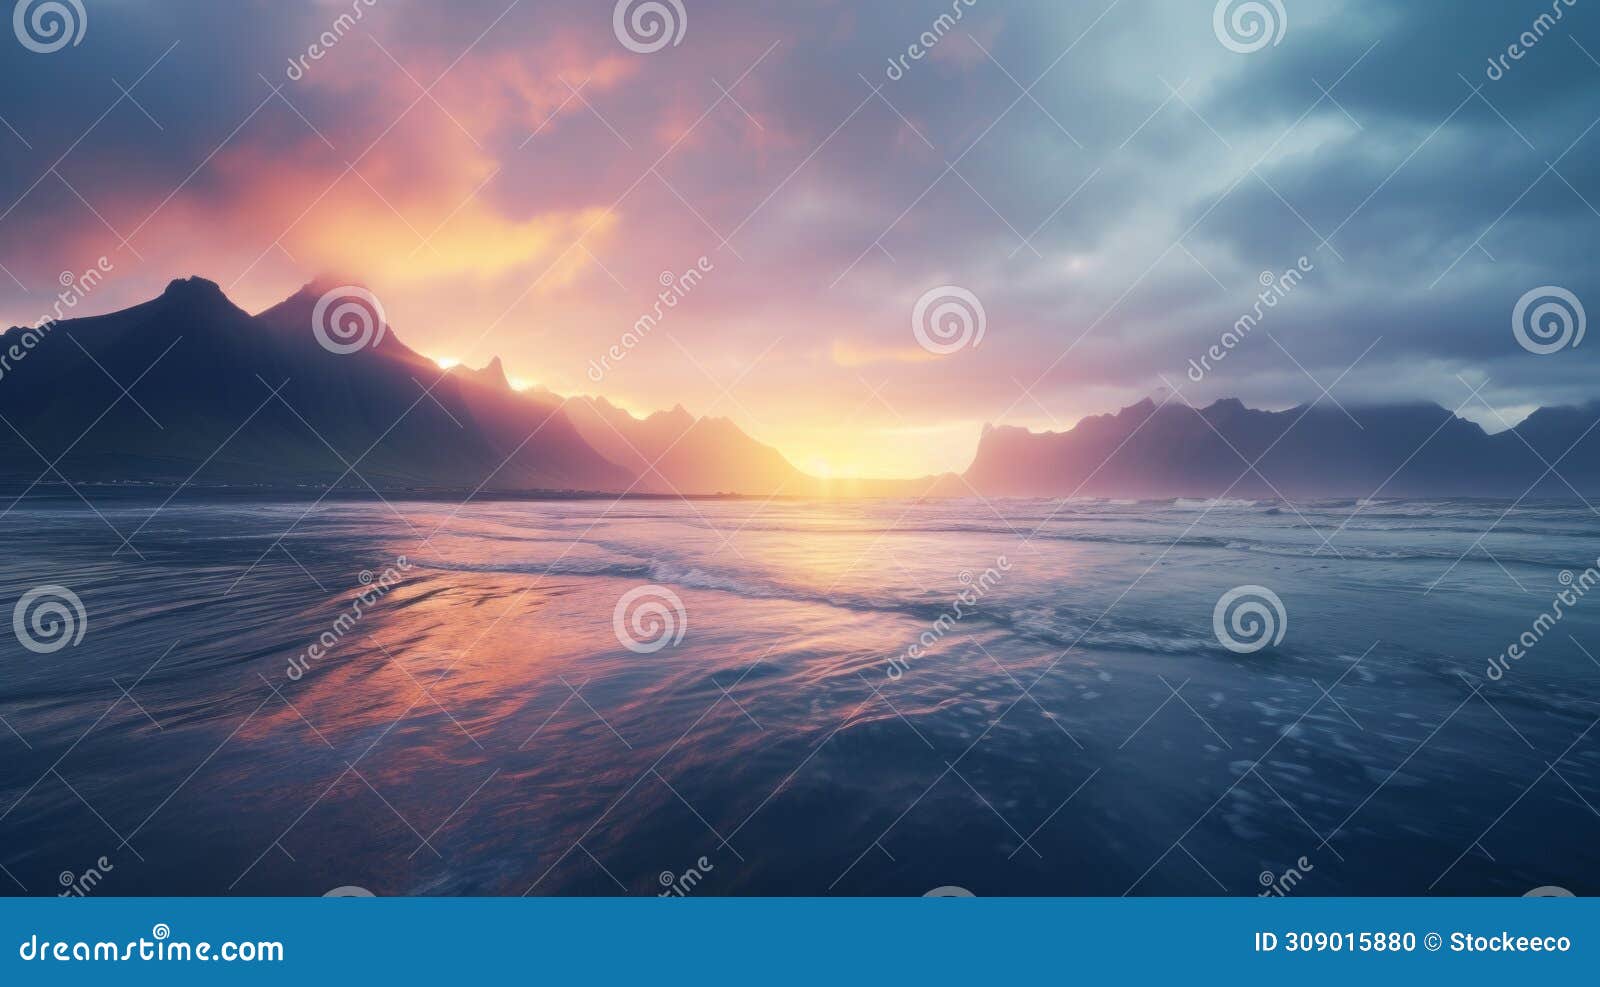 stunning sunrise sea photography with majestic clouds and godrays